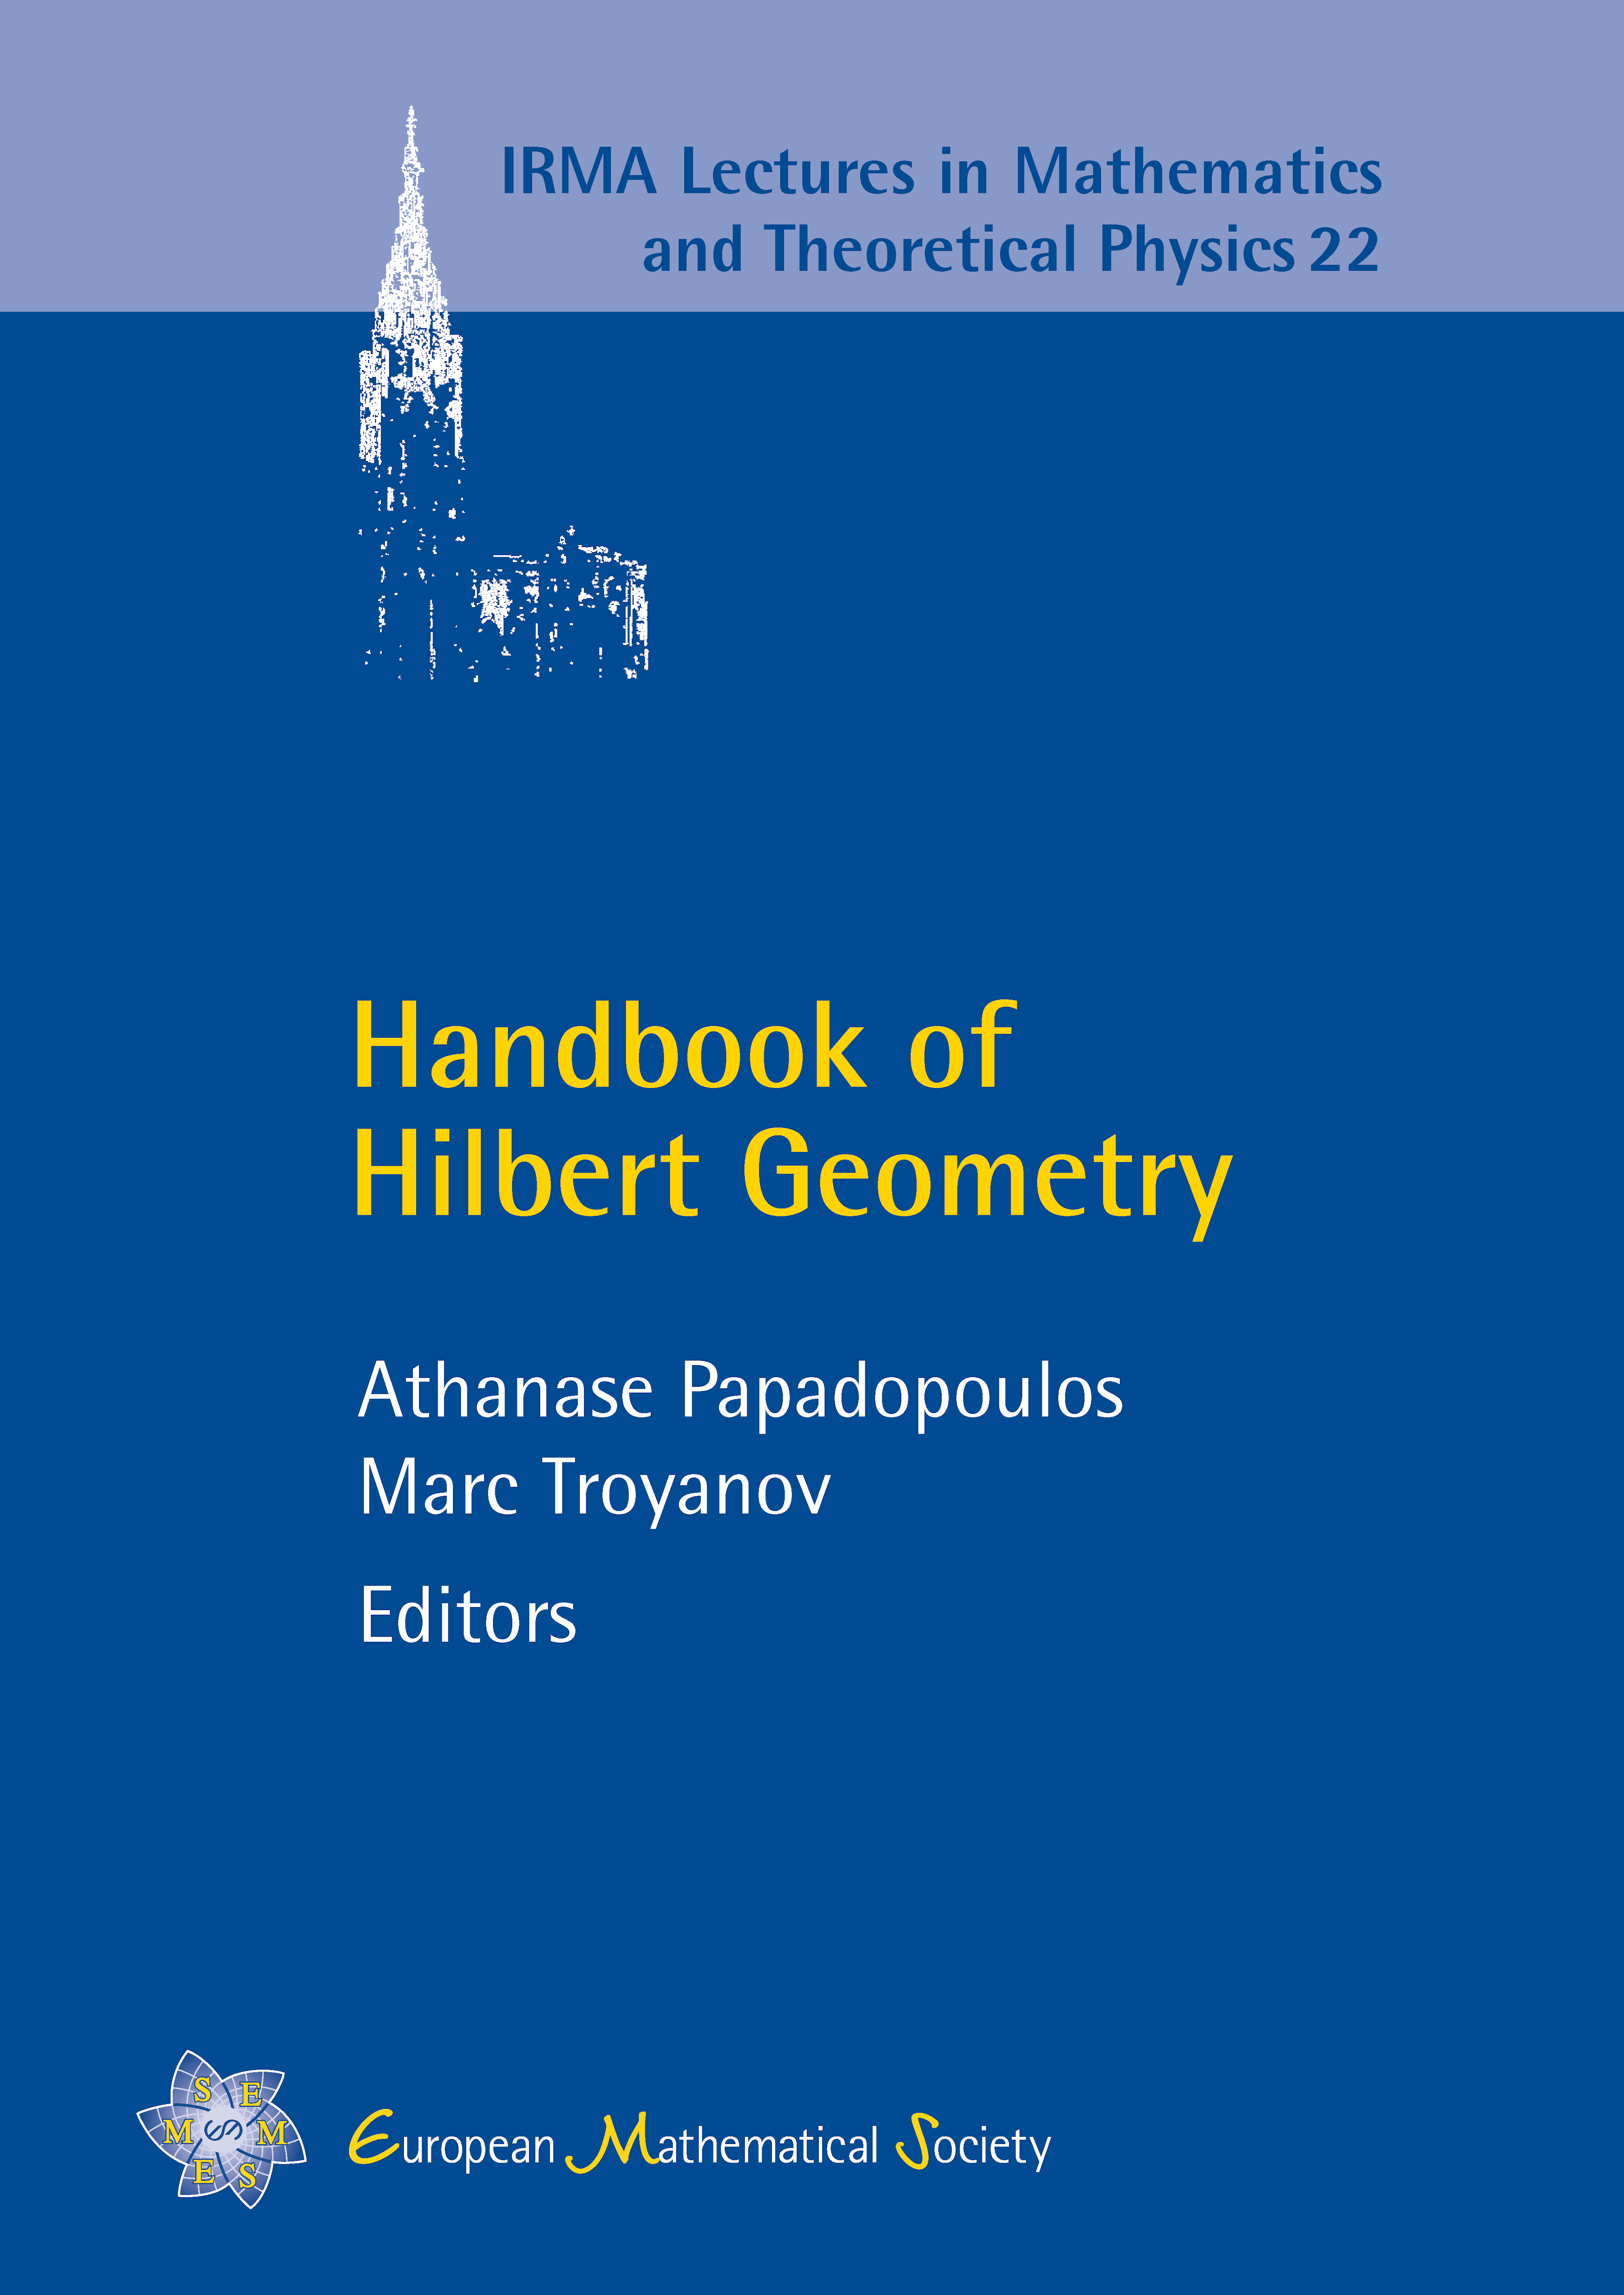 The horofunction boundary and isometry group of the Hilbert geometry cover